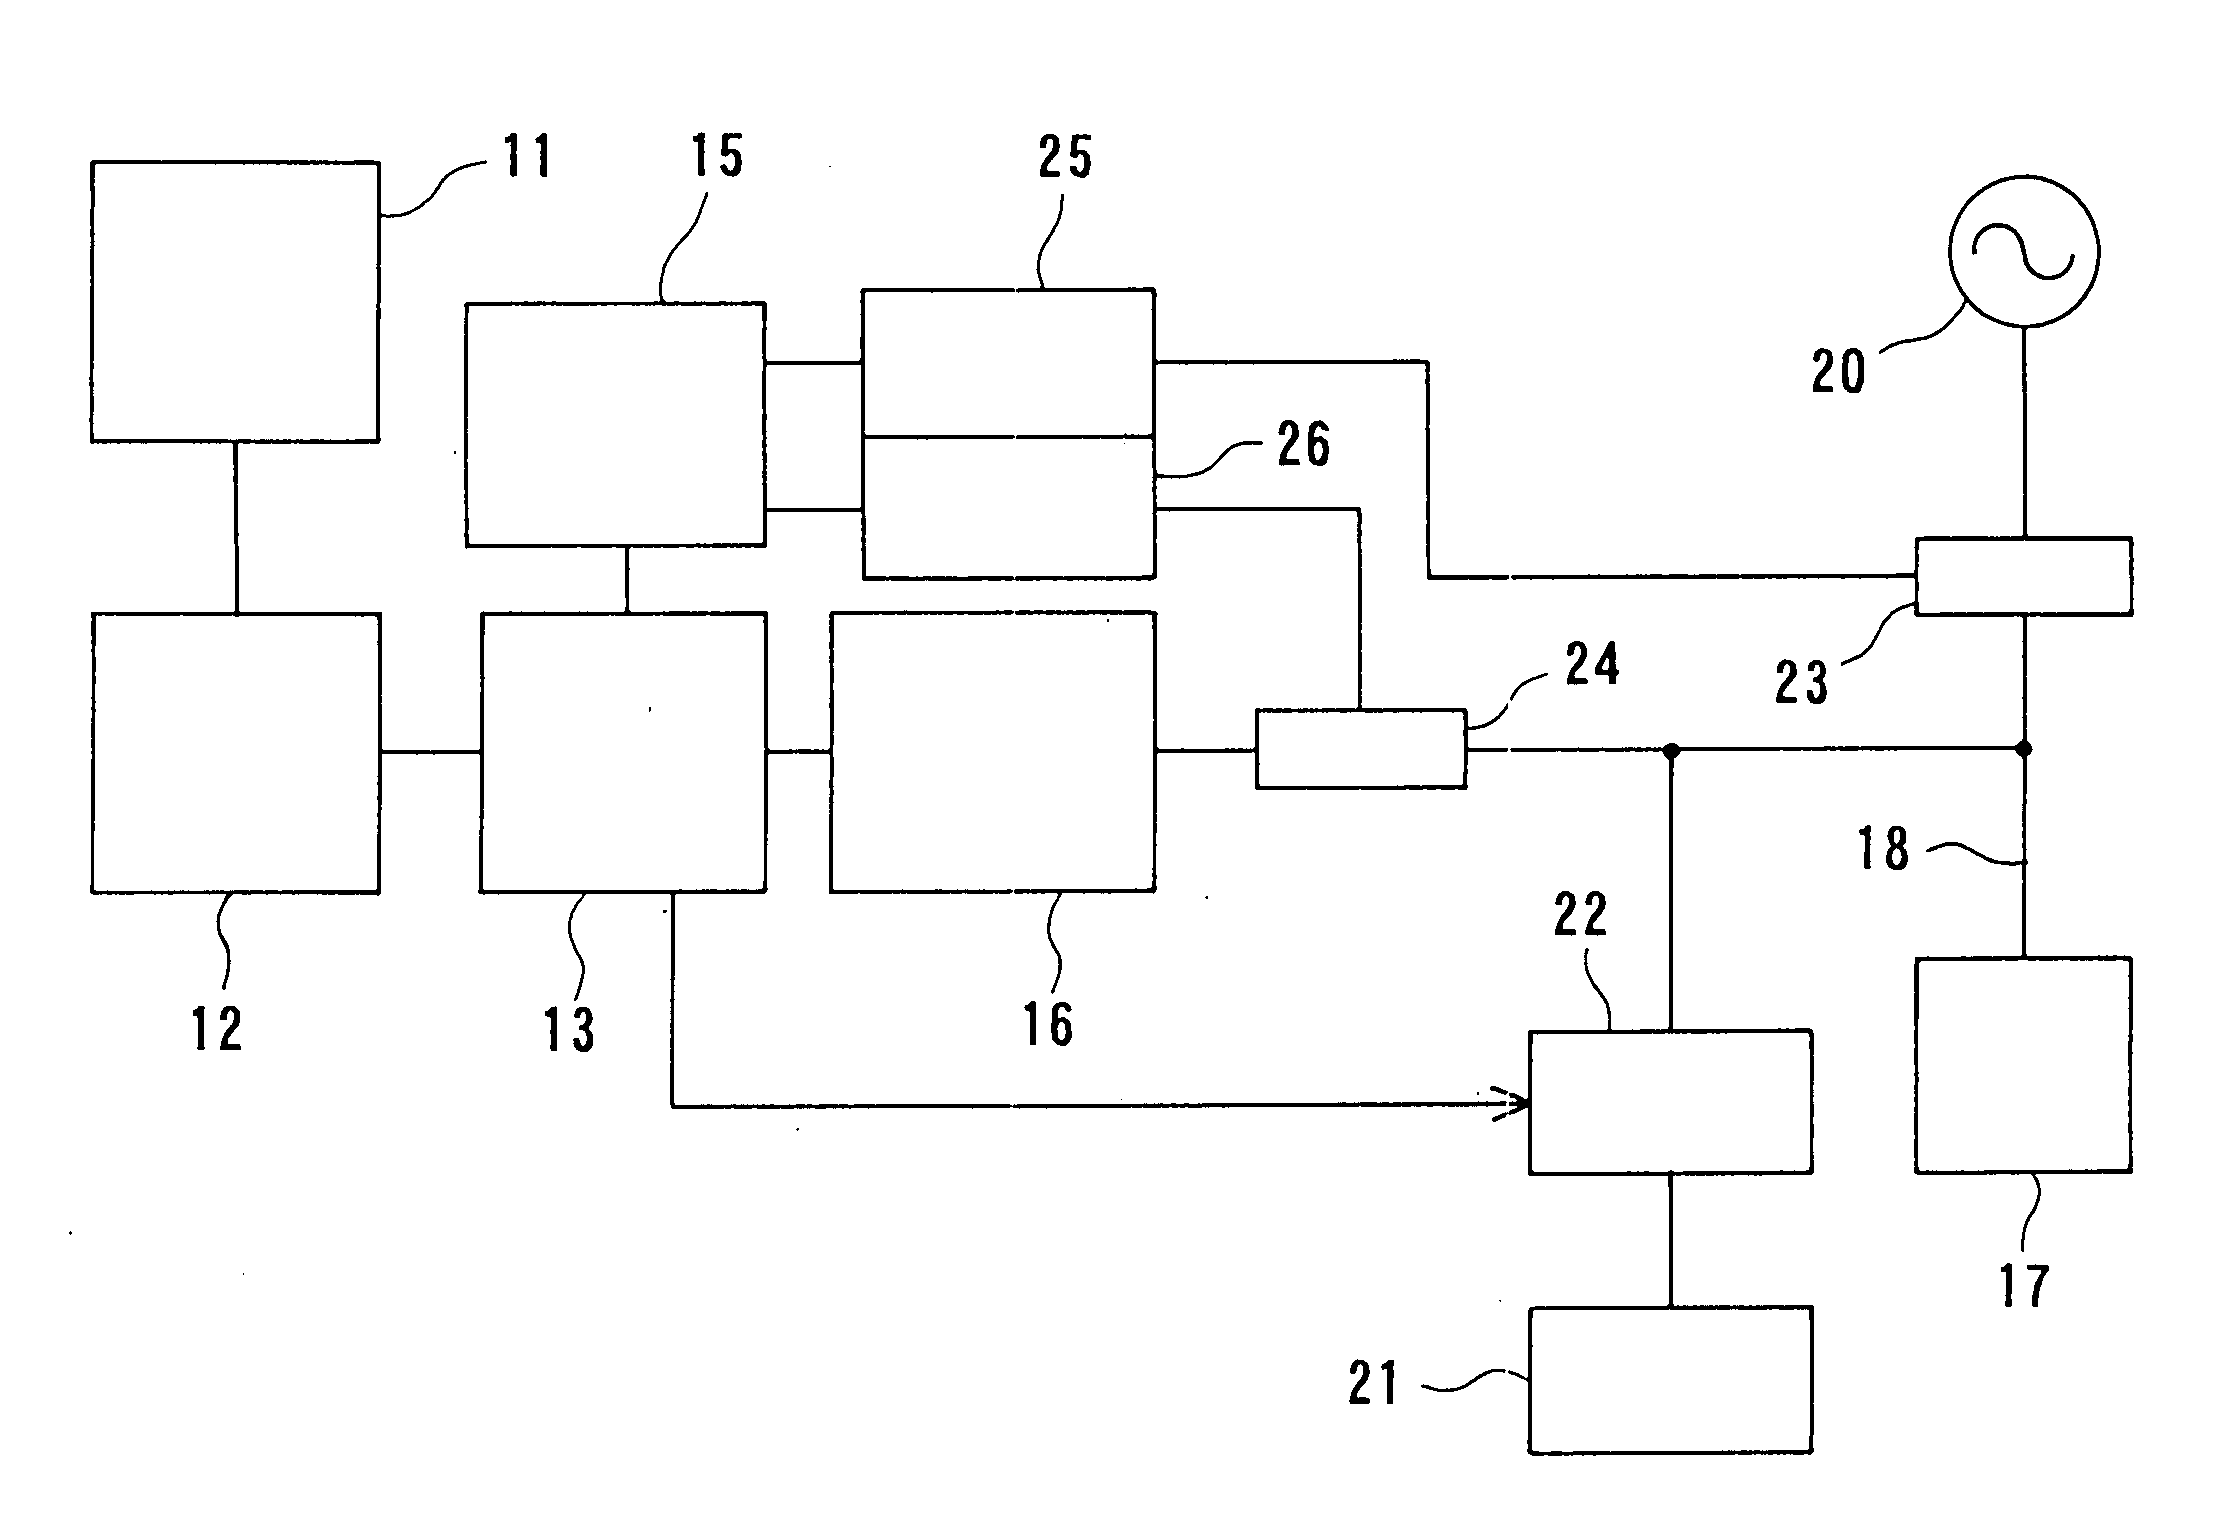 Power supply including system interconnection inverter